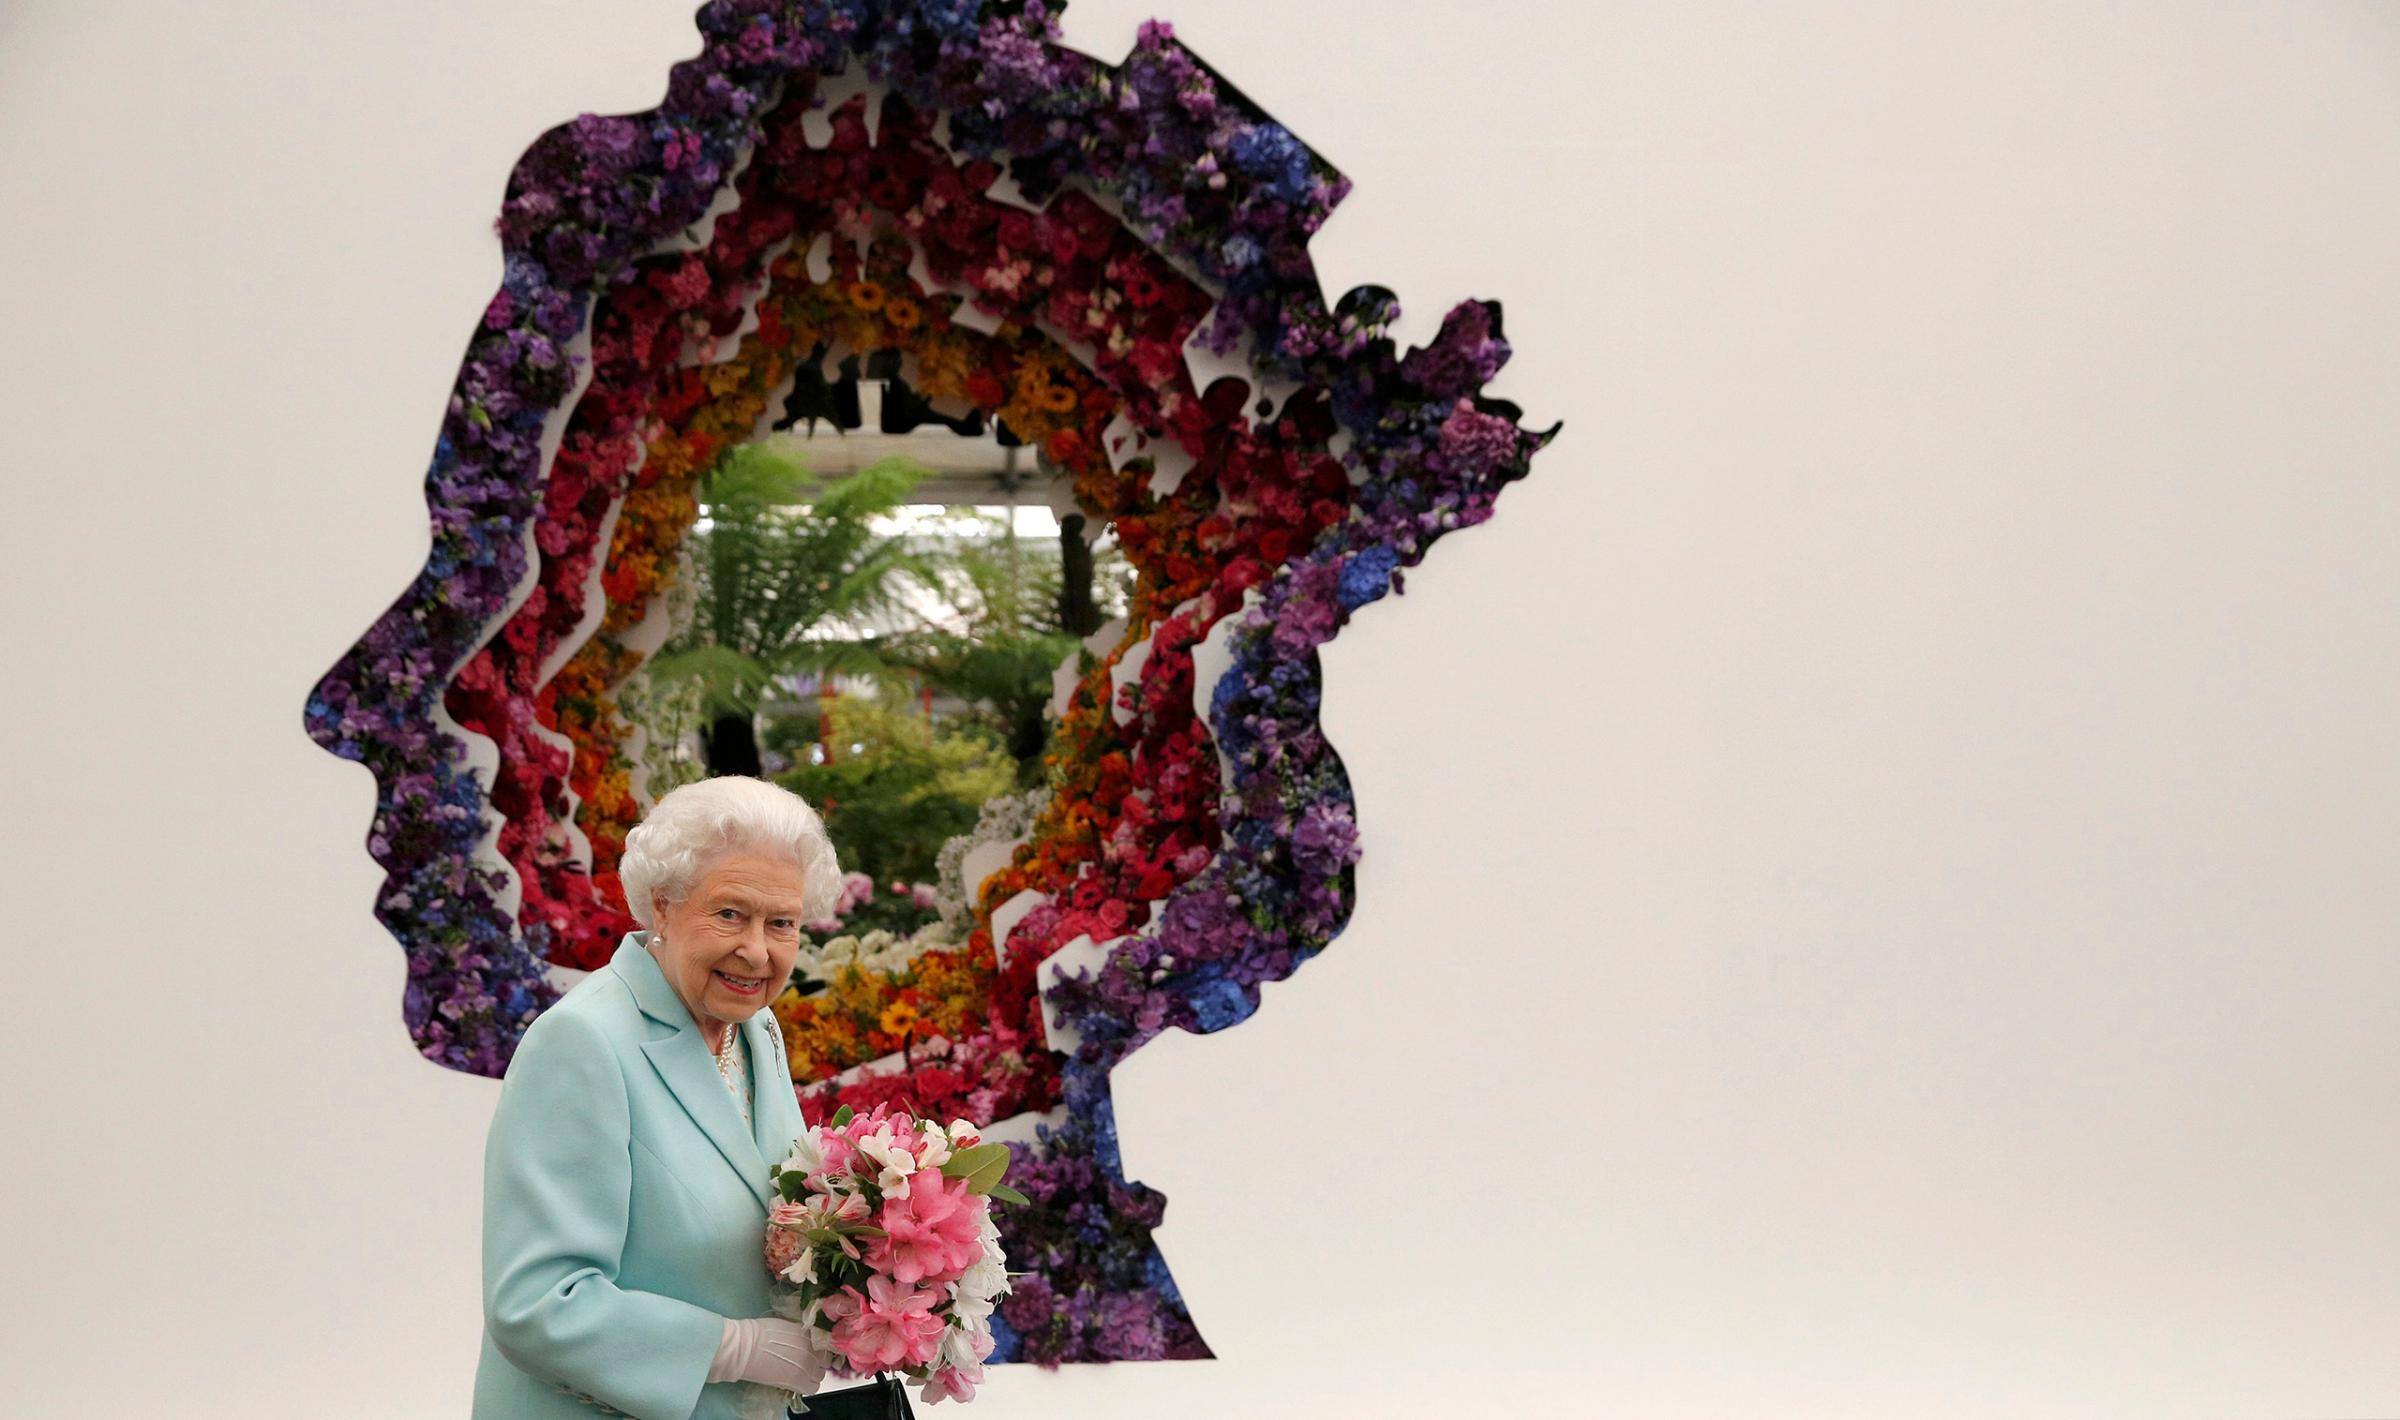 Queen Elizabeth II stands in front of a floral exhibit by the New Covent Garden Flower Market, which features an image of the Queen at the Chelsea Flower Show in London, May 23, 2016.